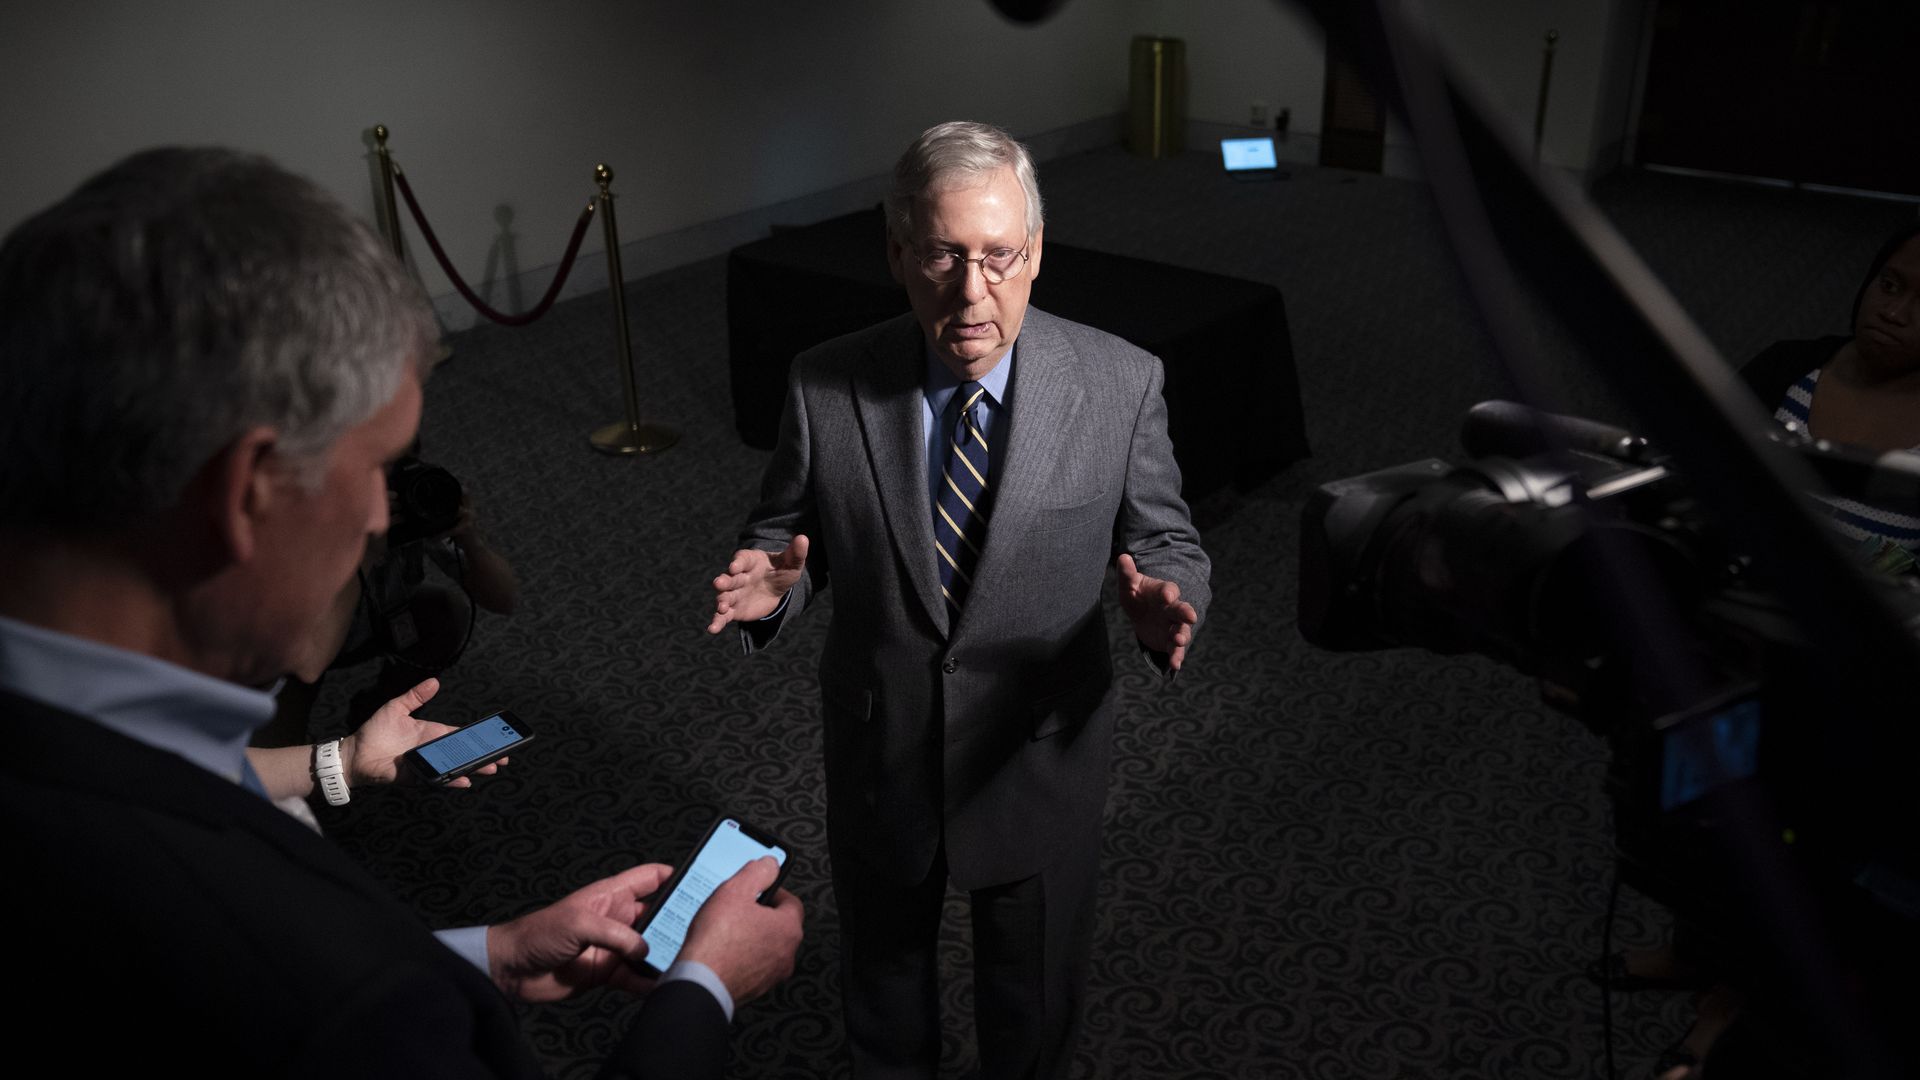  Senate Majority Leader Mitch McConnell (R-KY) speaks to reporters 